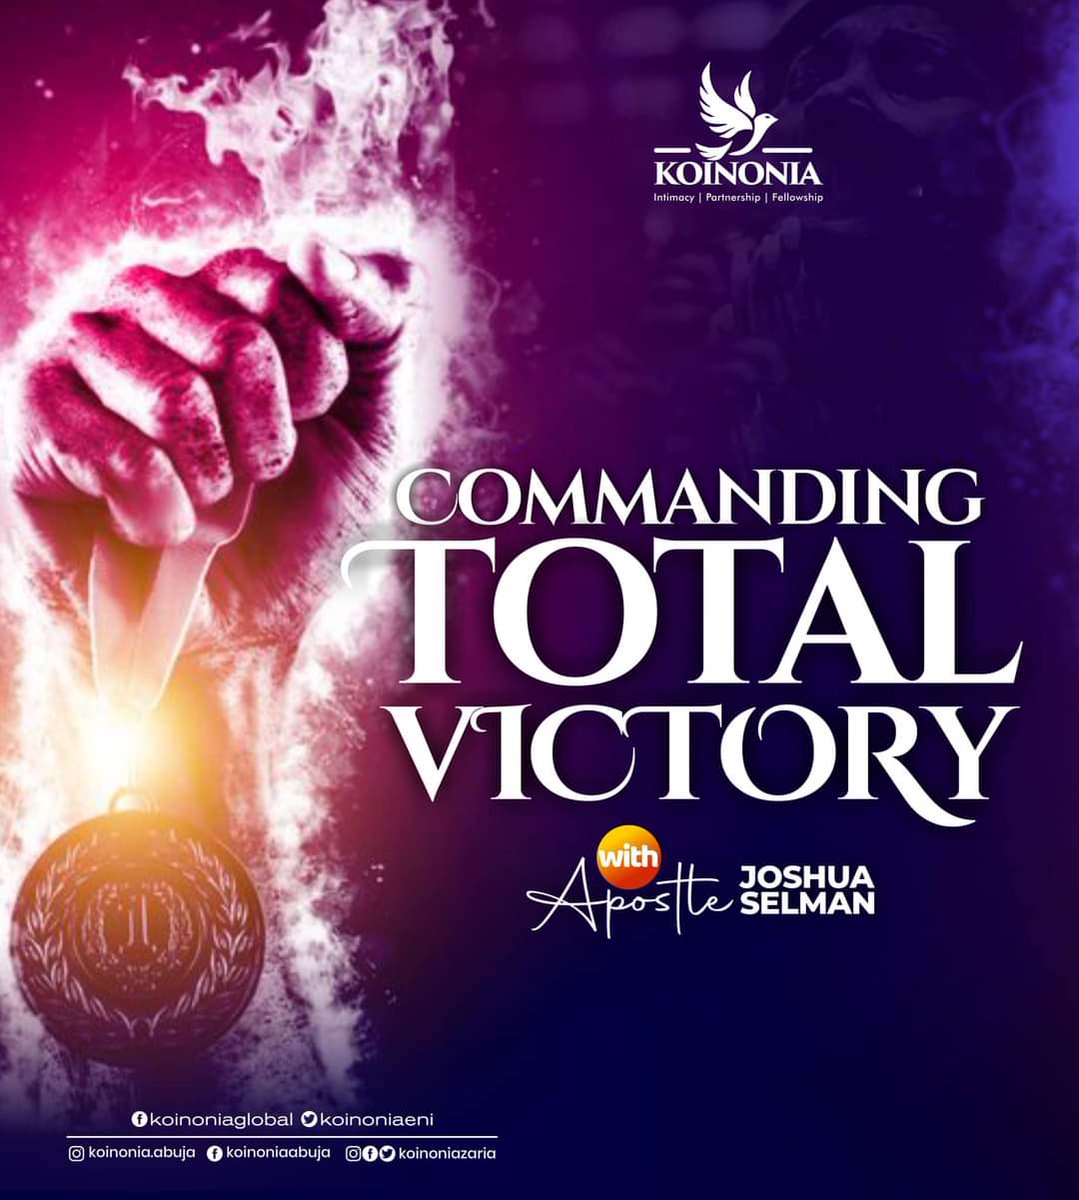 Dear Beloved, kindly click on the link below to download the audio message of 'COMMANDING TOTAL VICTORY' WITH APOSTLE JOSHUA SELMAN.

bit.ly/45j7QL0

#ApostleJoshuaSelman
#CommandingTotalVictory
#KoinoniaAbuja